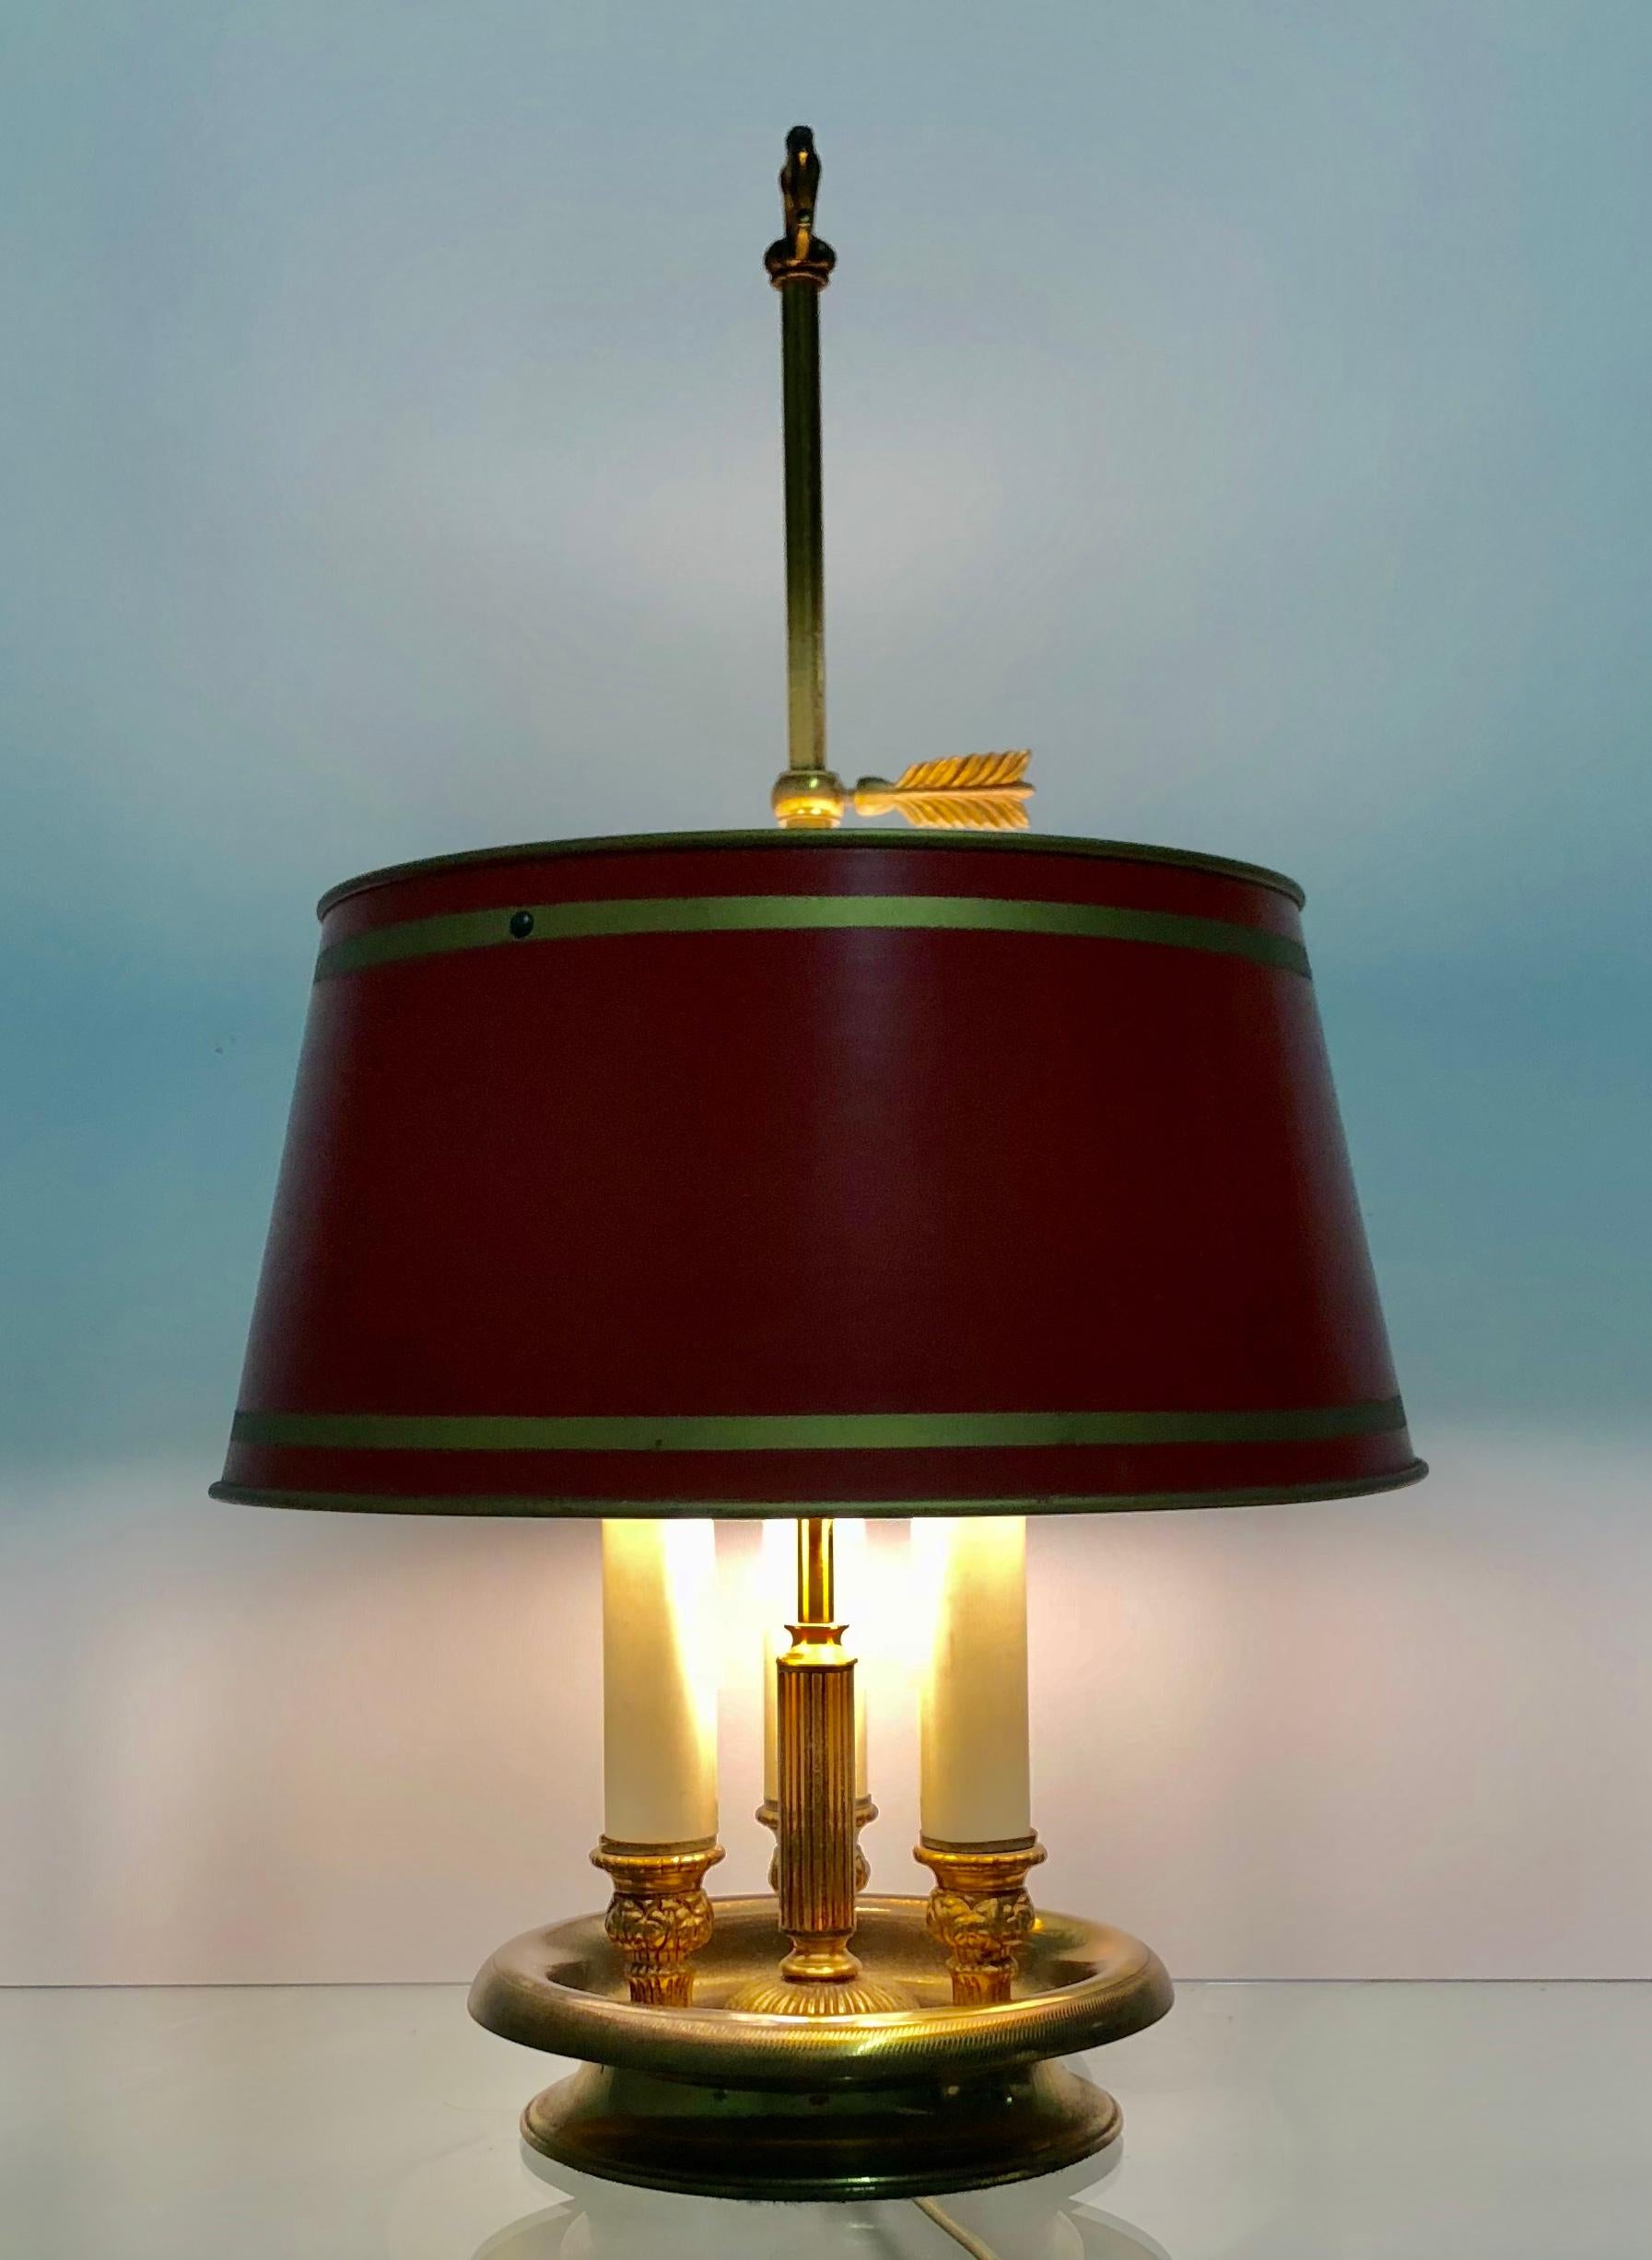 A french bouillotte bronze three-light table lamp in the style of Empire, France, circa 1940s
The lamp is made of bronze and red metal lampshade.
Socket: Three E14 for standard screw bulbs.
In an excellent original condition.

